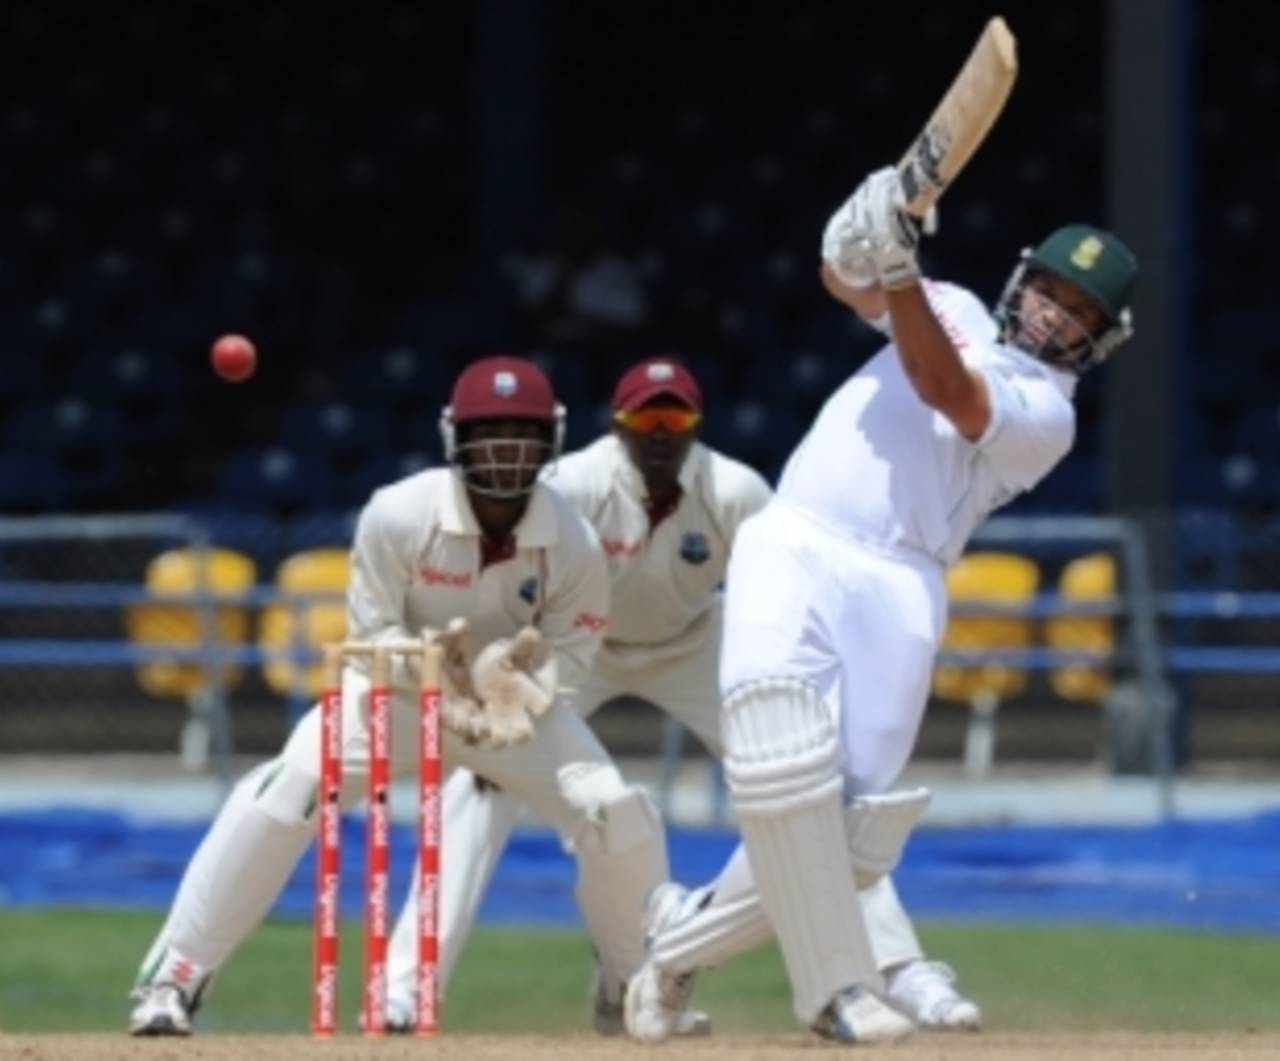 Ashwell Prince built an important partnership with AB de Villiers after wickets had fallen in the morning, West Indies v South Africa, 1st Test, Trinidad, June 11, 2010